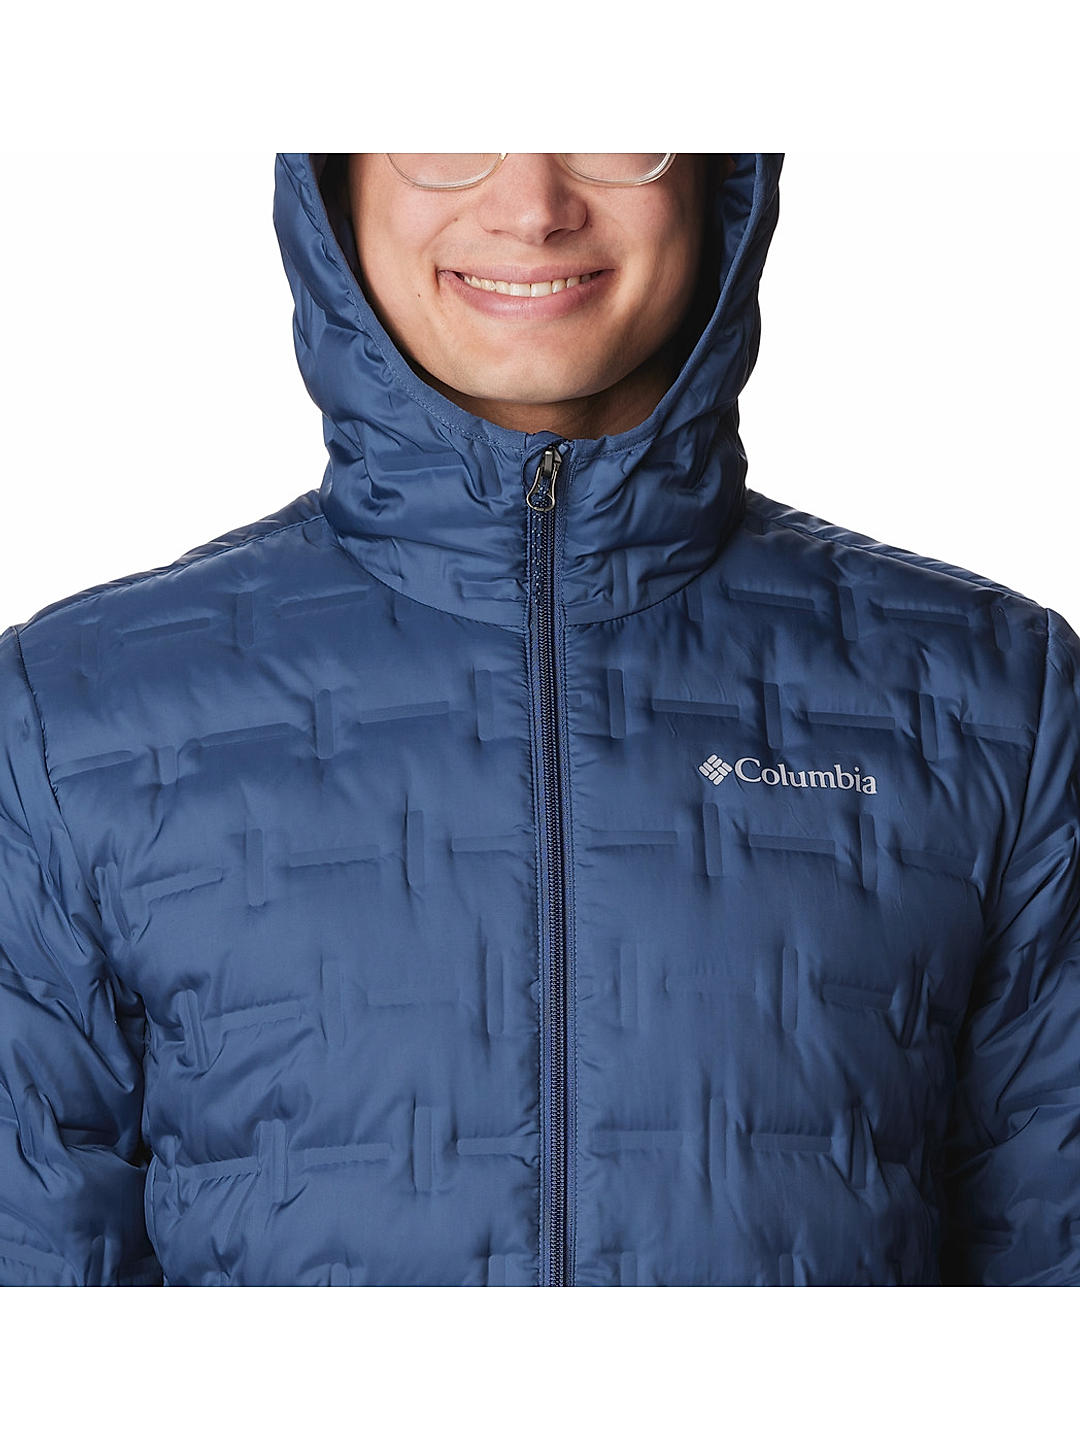 Columbia Omni-Shield Mens M Navy Blue All Weather Jacket Removable Hoodie  VGC